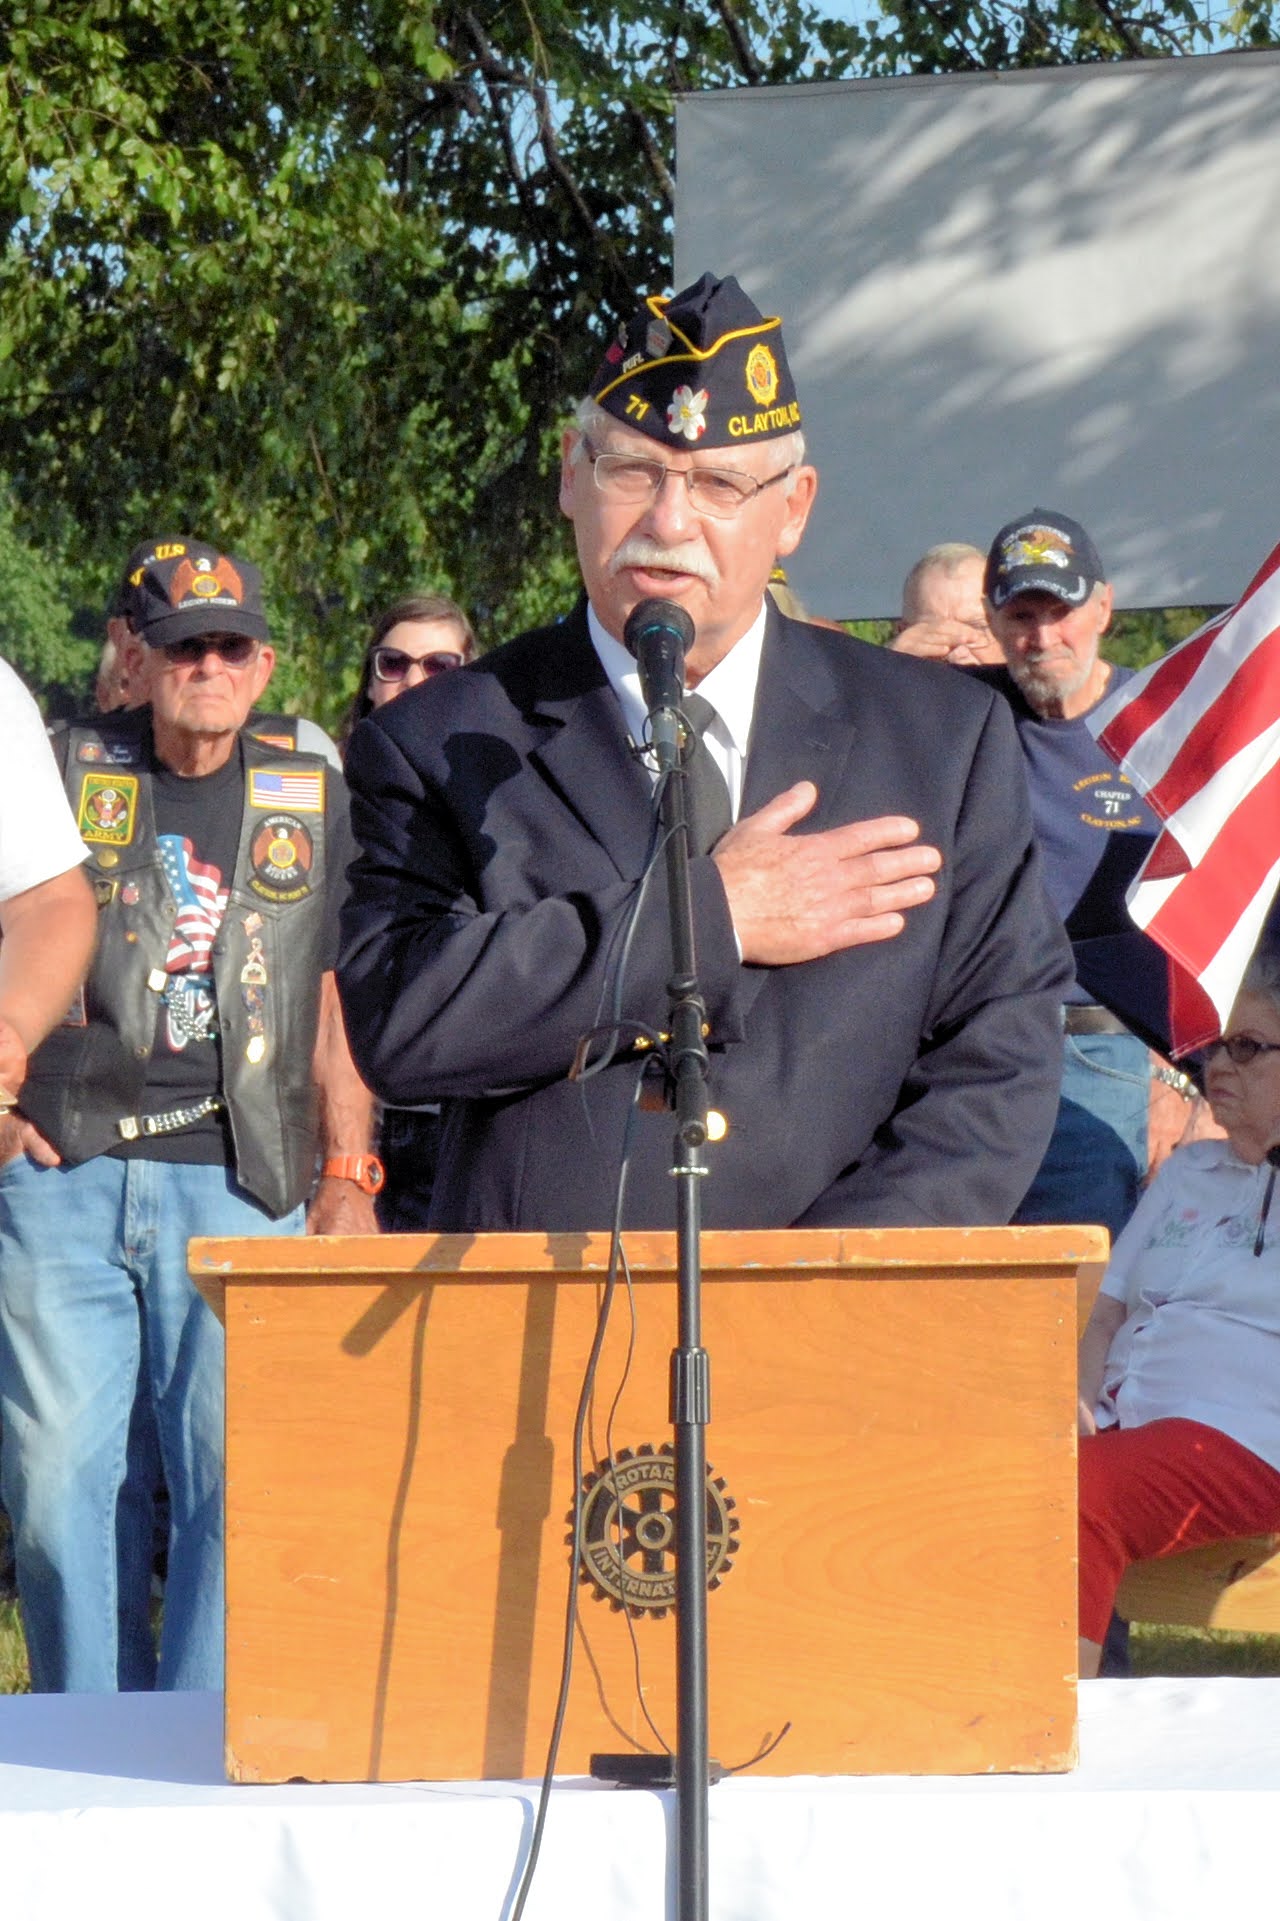 Tribute to Veterans and Flag Day June 14, 2021 (Photo Credit Kristin Brown)